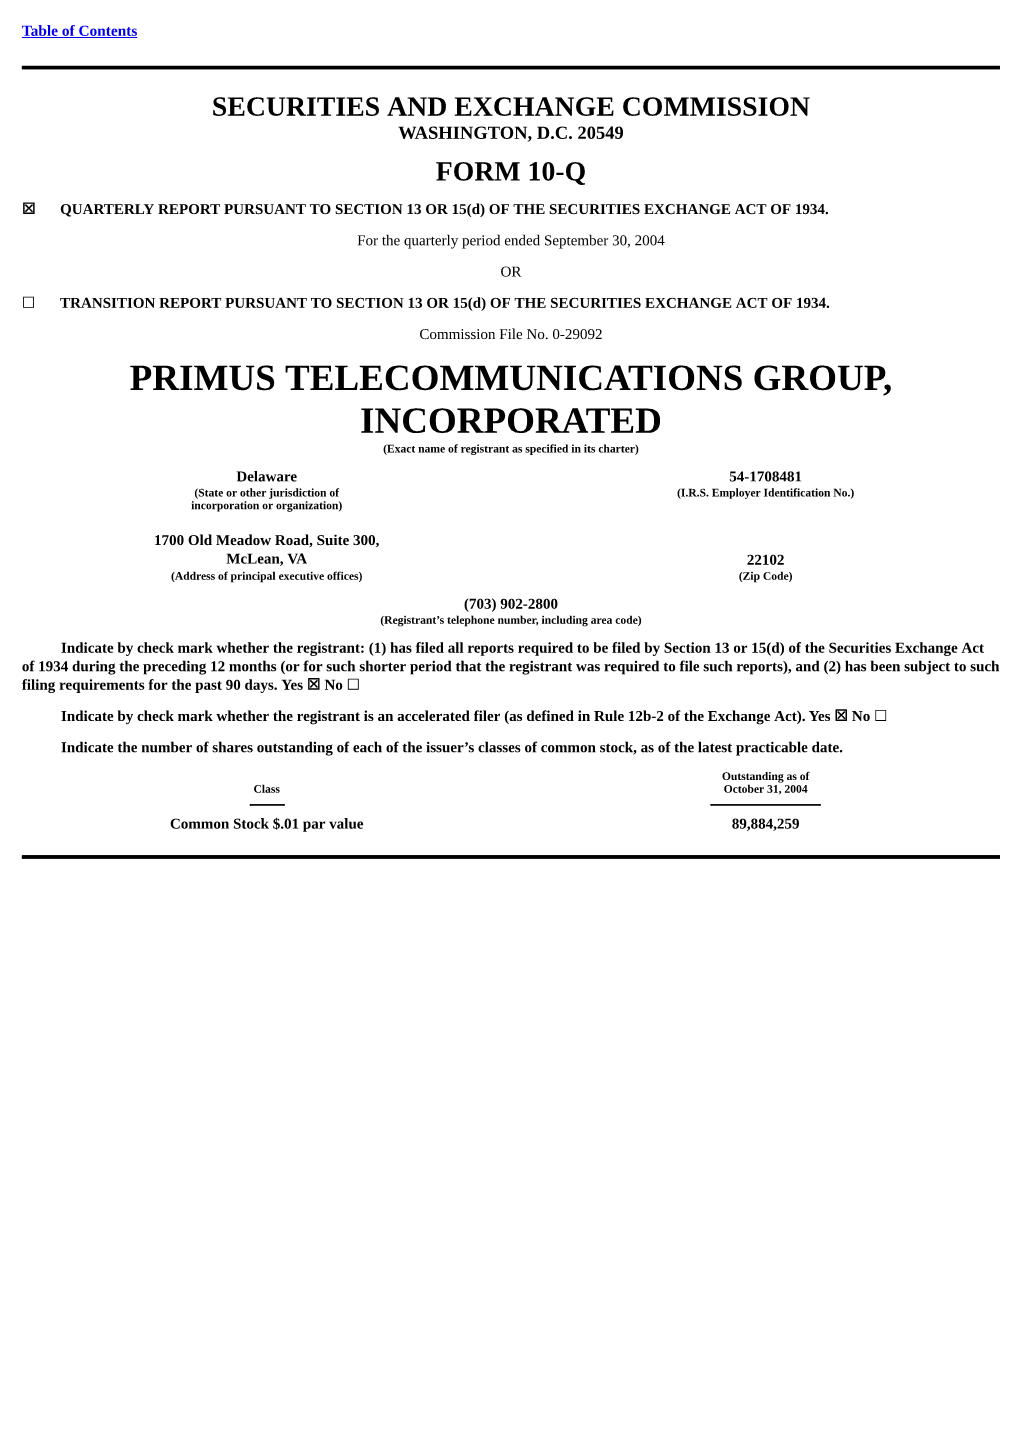 PRIMUS TELECOMMUNICATIONS GROUP, INCORPORATED (Exact Name of Registrant As Specified in Its Charter)